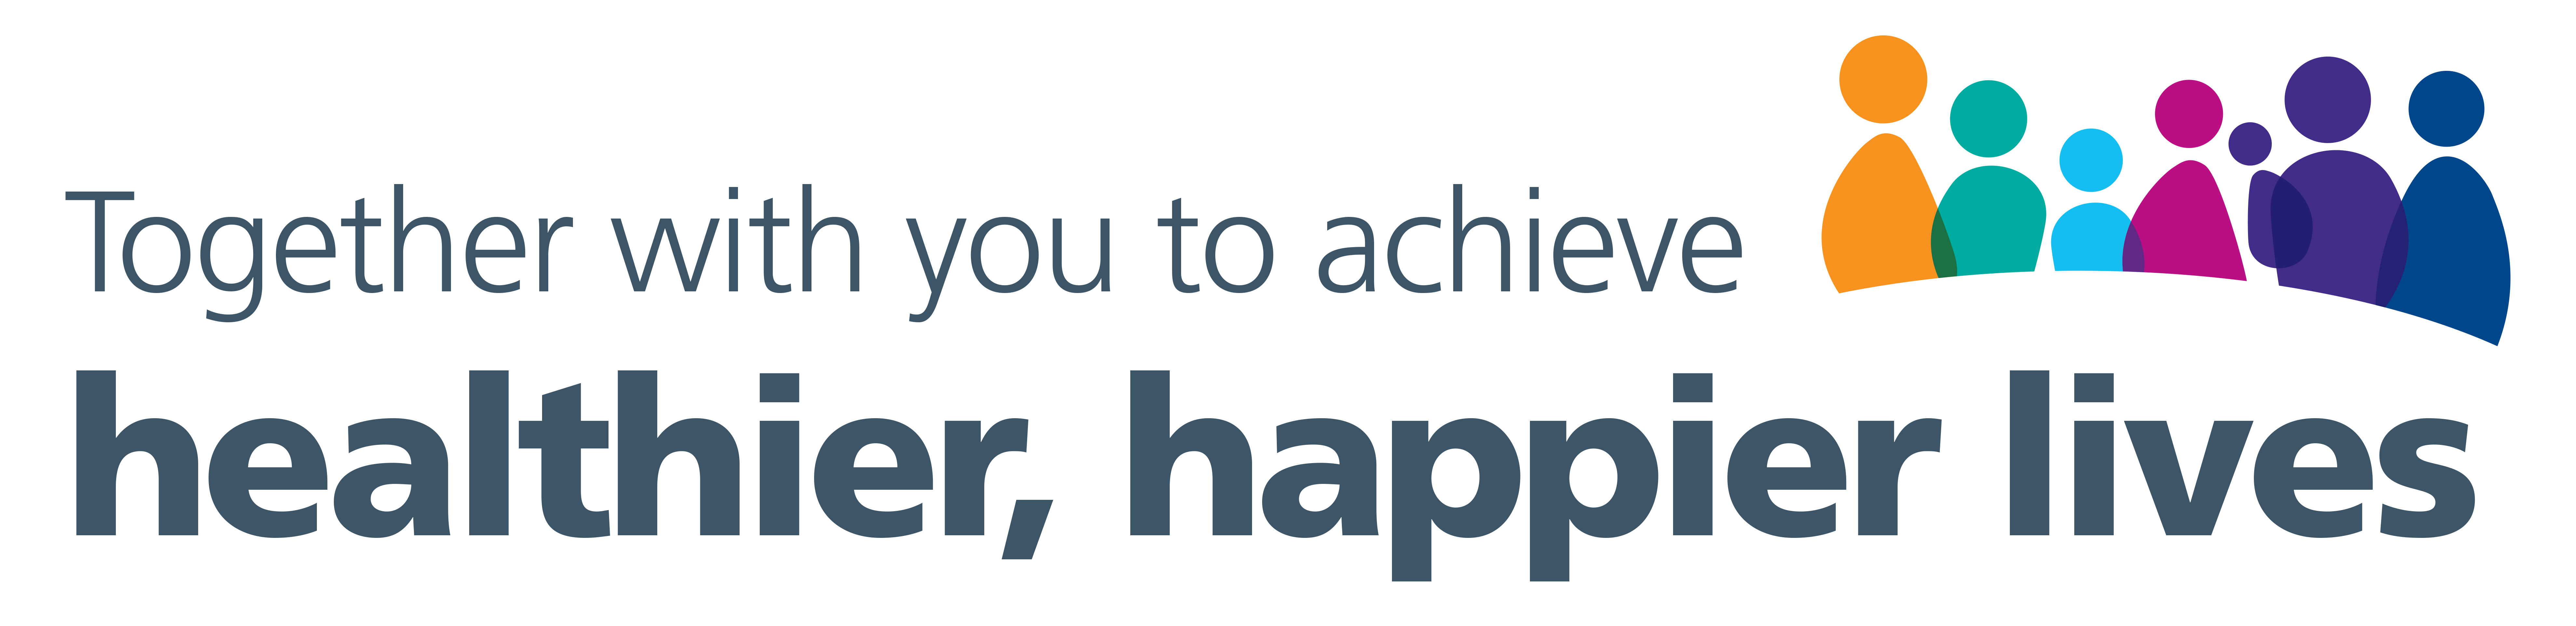 Happier_Healthier_Lives_Graphic.png